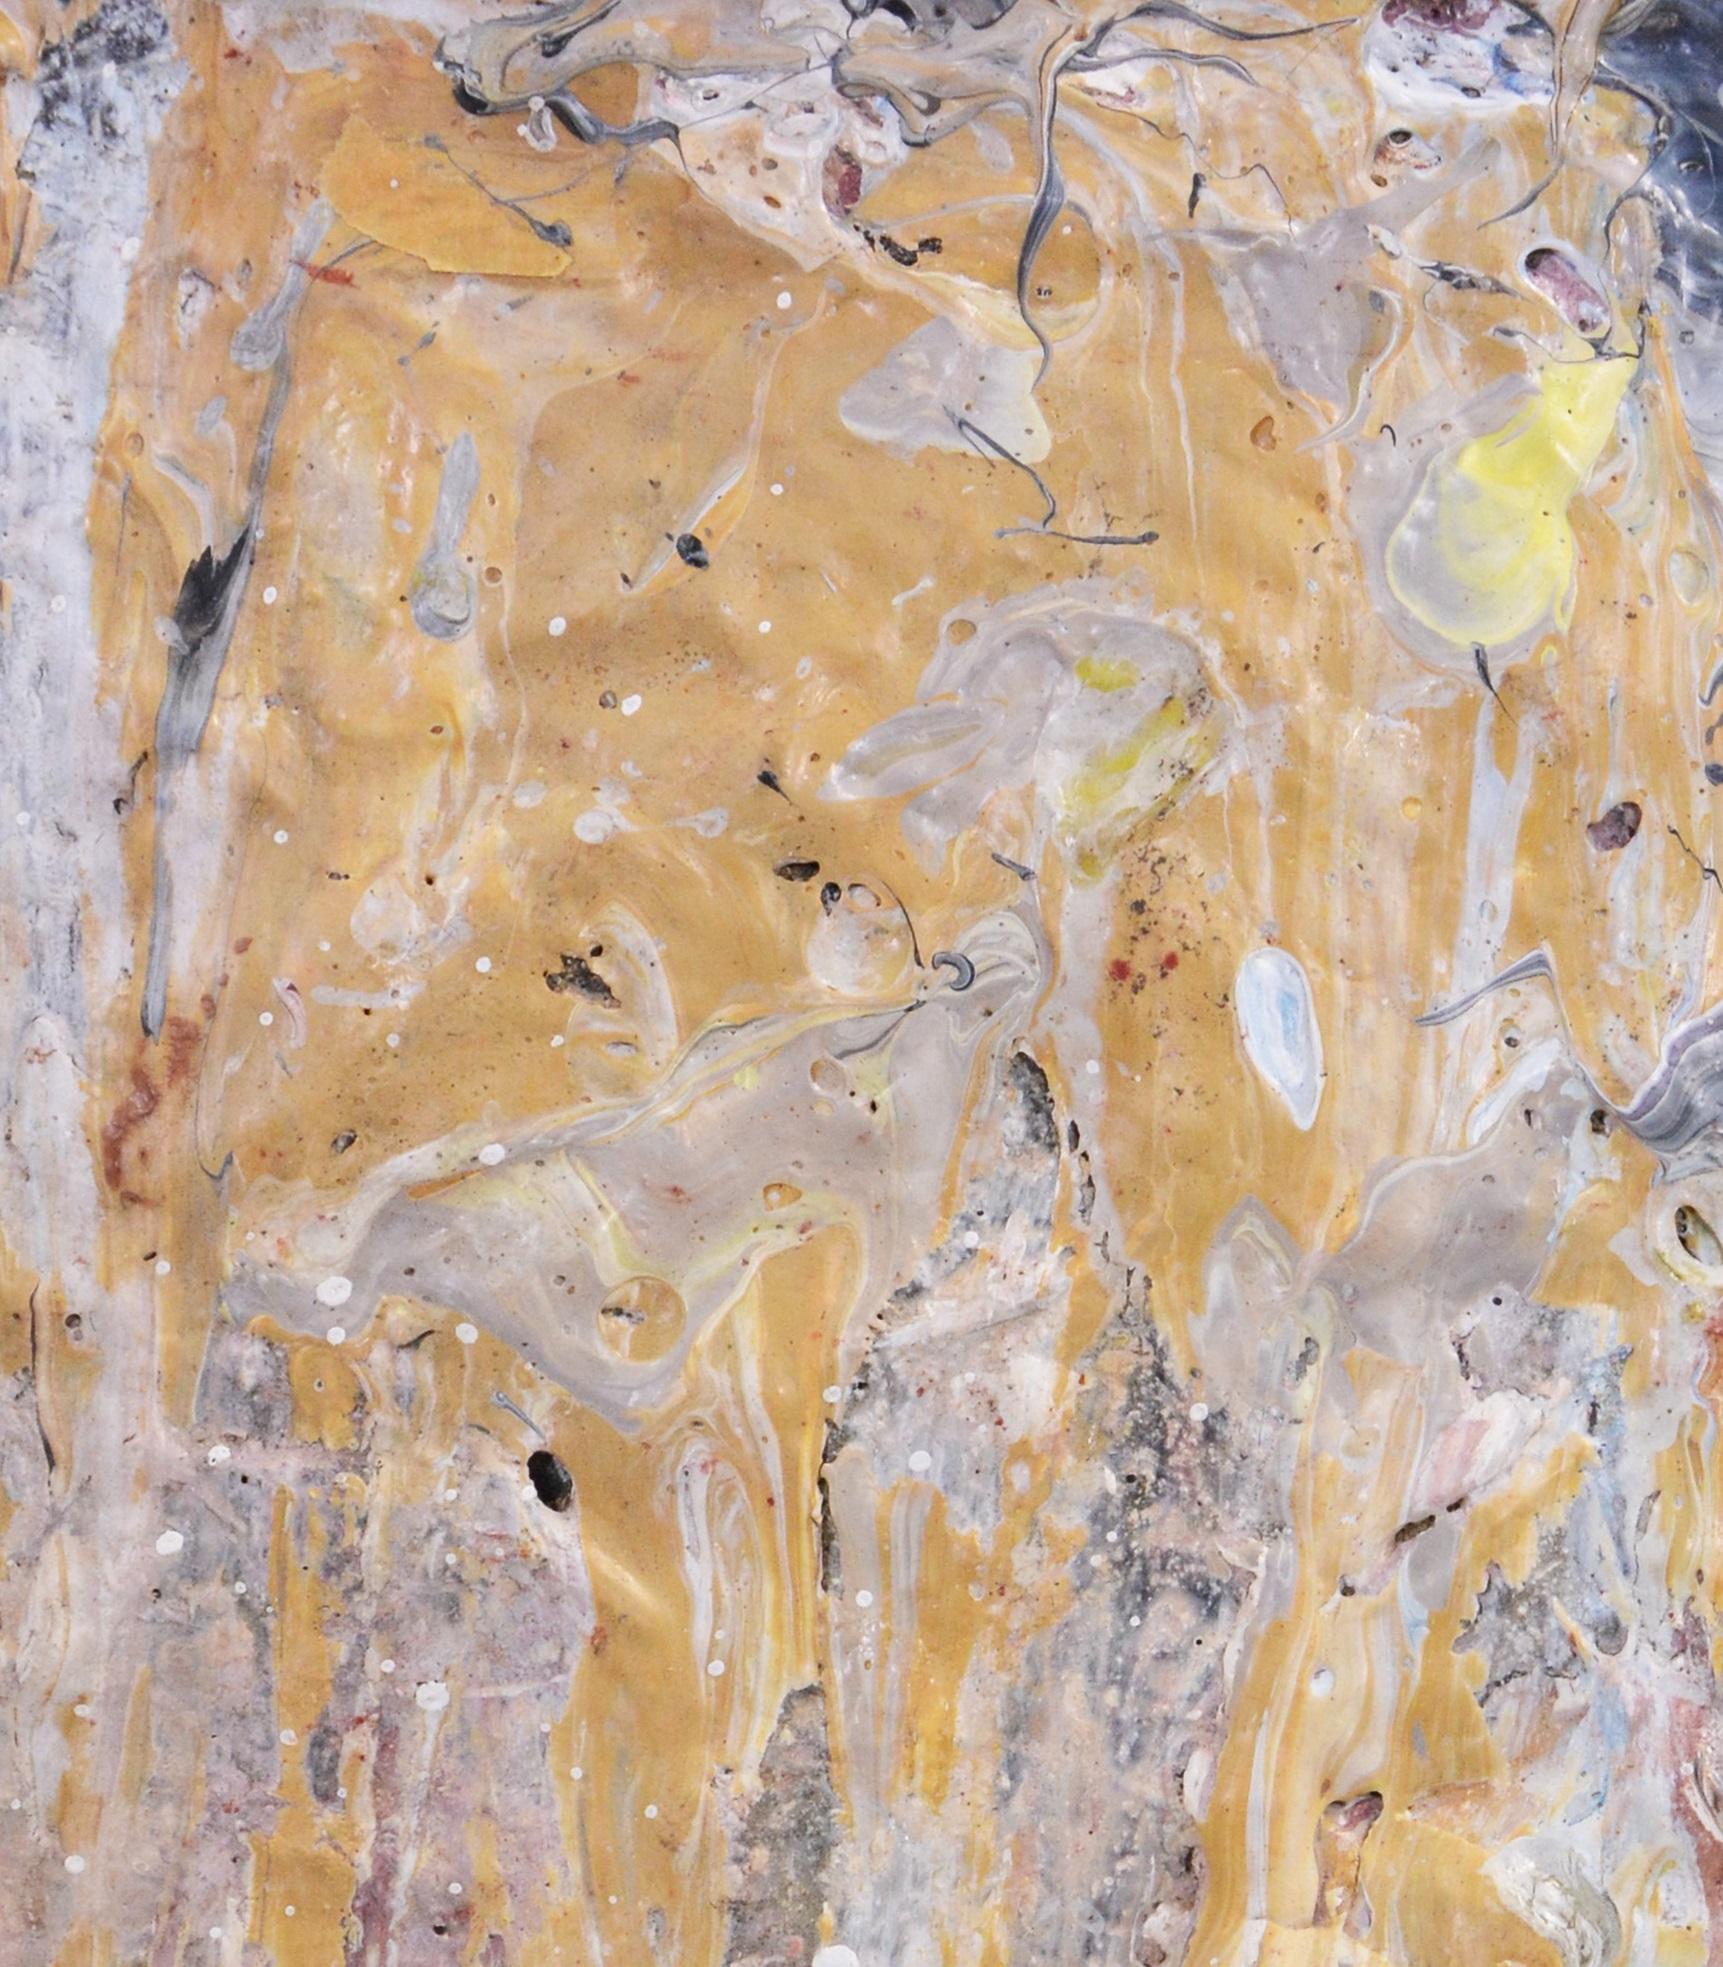 84BS-2 - Abstract Expressionist Painting by Larry Poons